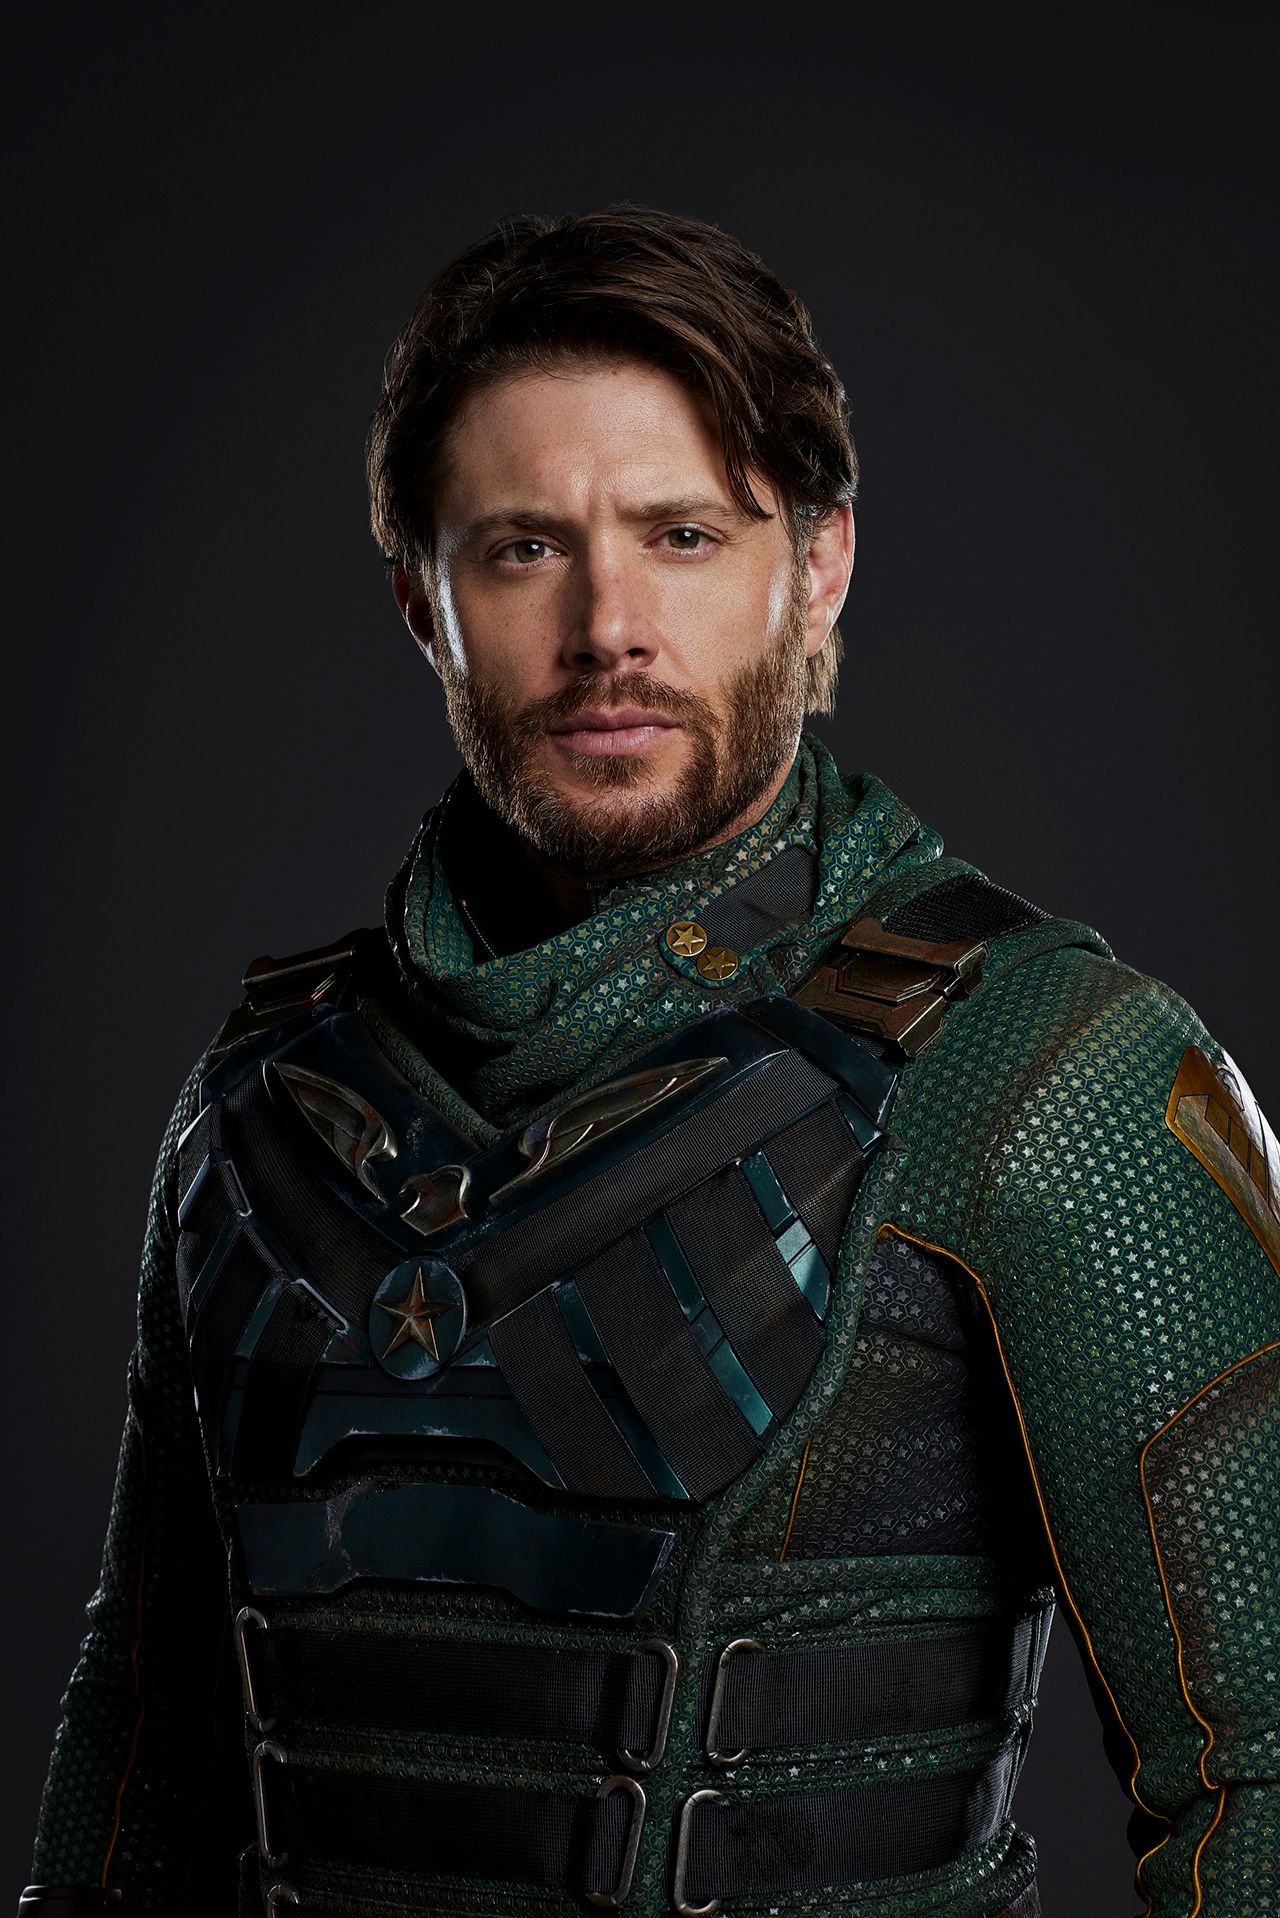 Jensen Ackles as Solider Boy in The Boys image #1